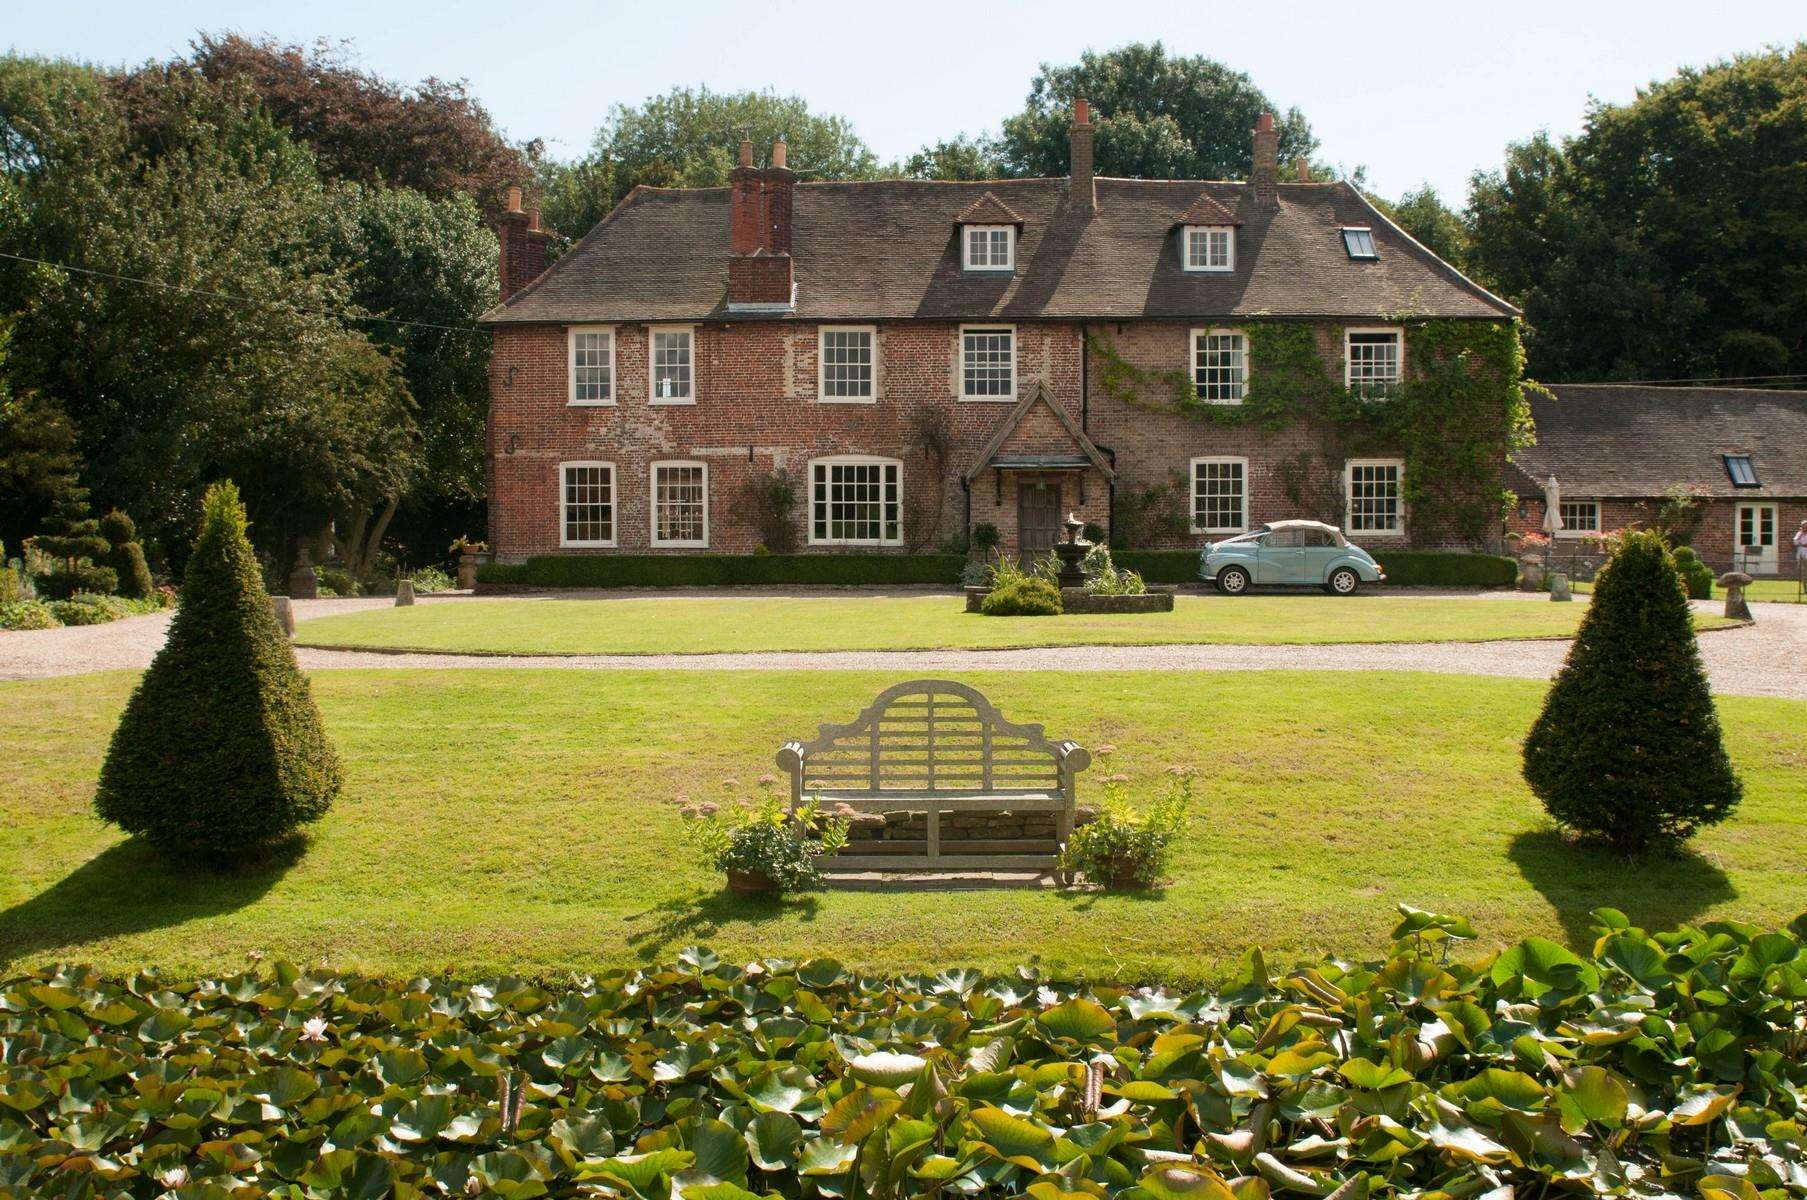 Popular wedding venue Solton Manor has reopened. Picture: IMMI Photography (5267214)